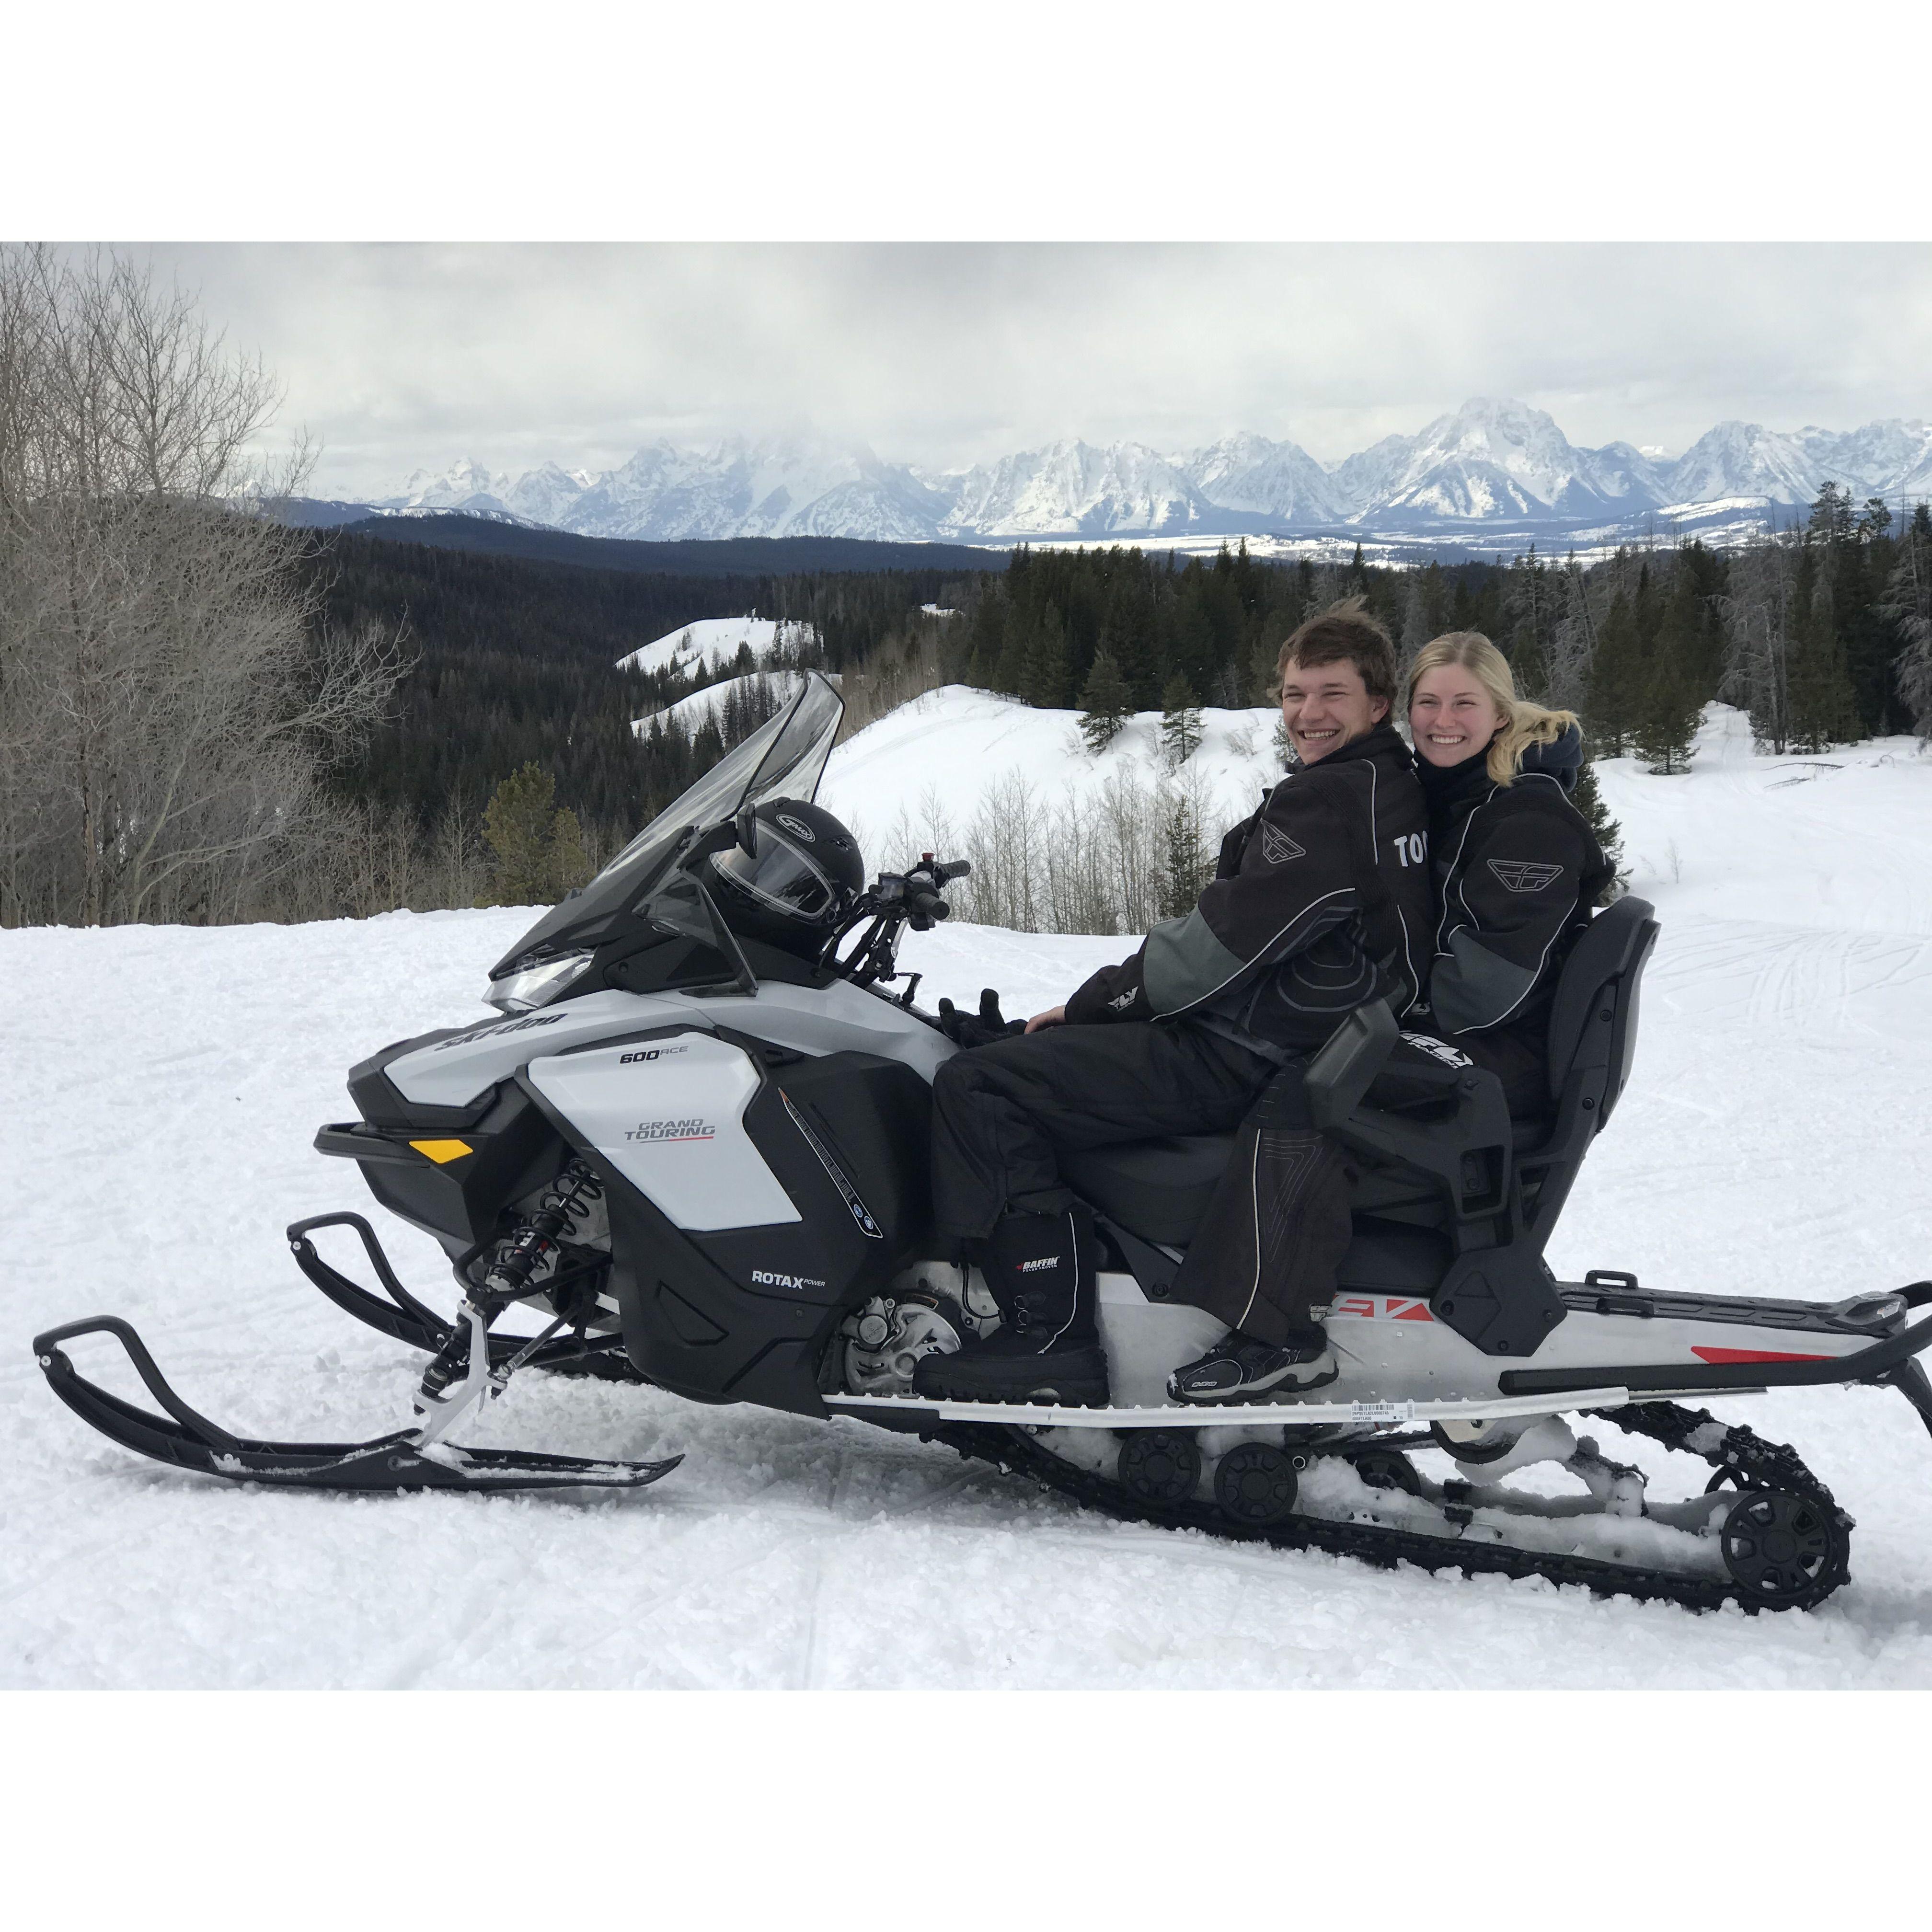 Snowmobiling in Jackson Hole, WY 2020!